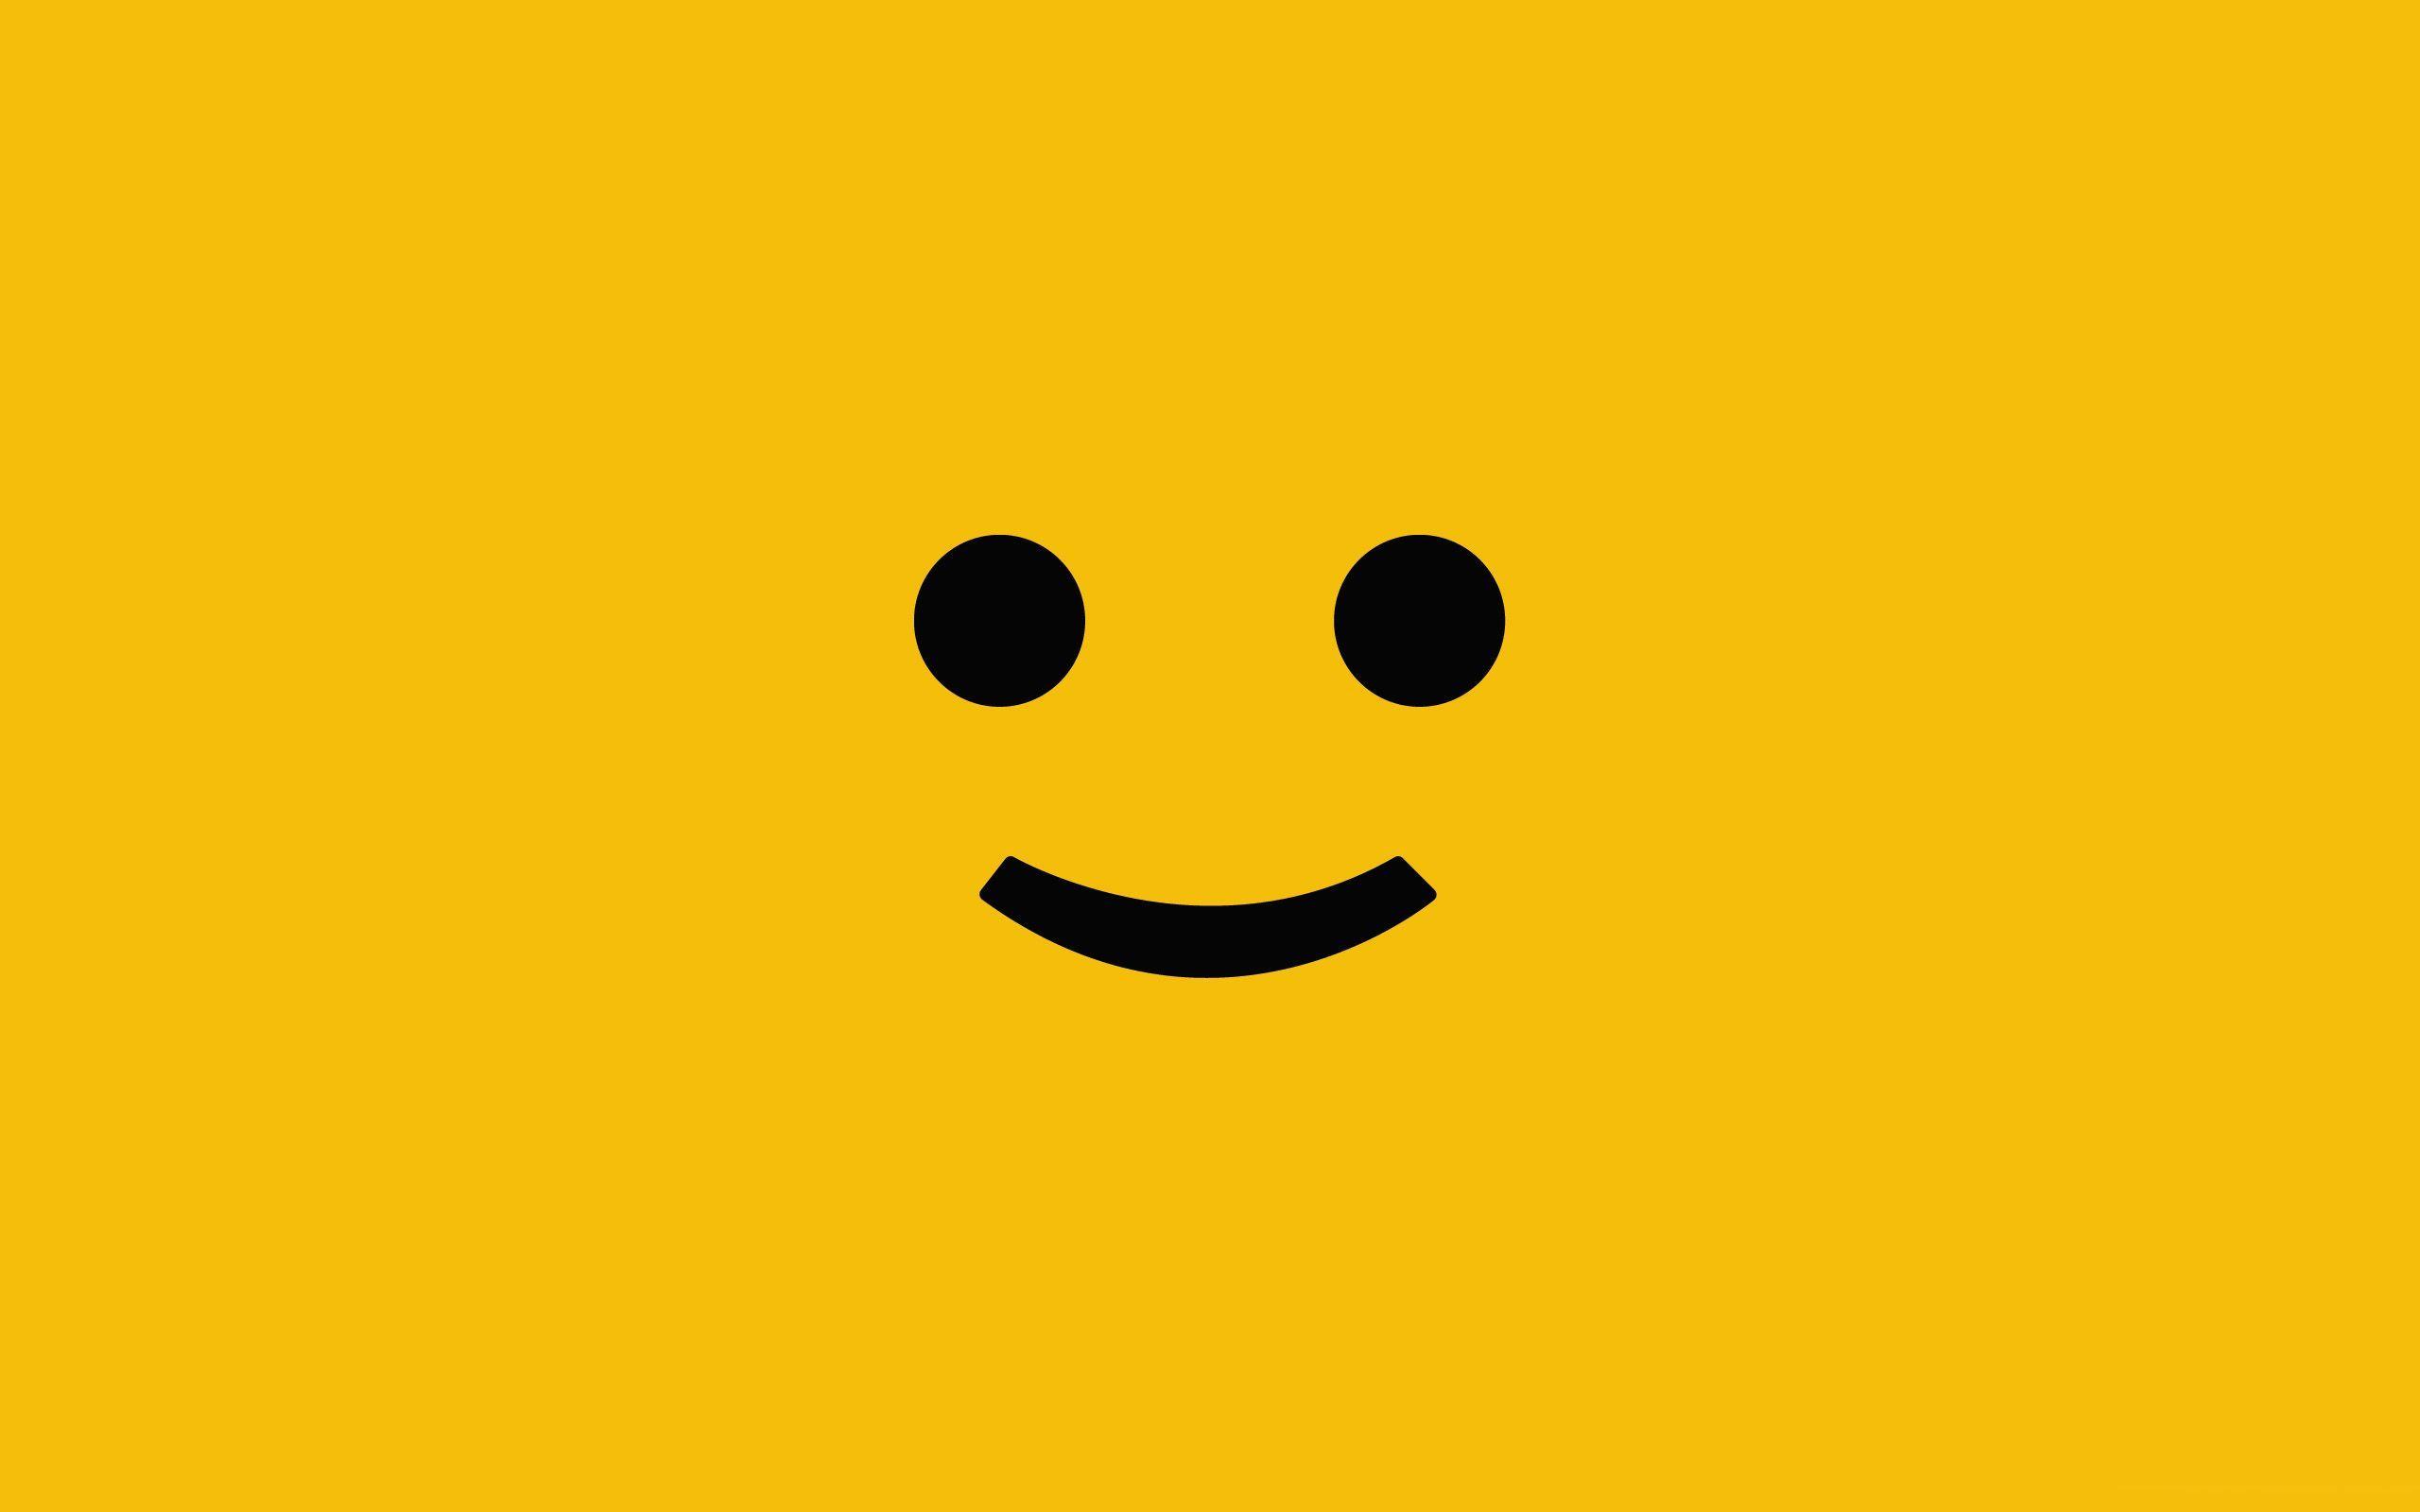 Wallpaper For > Colorful Smiley Face Wallpaper